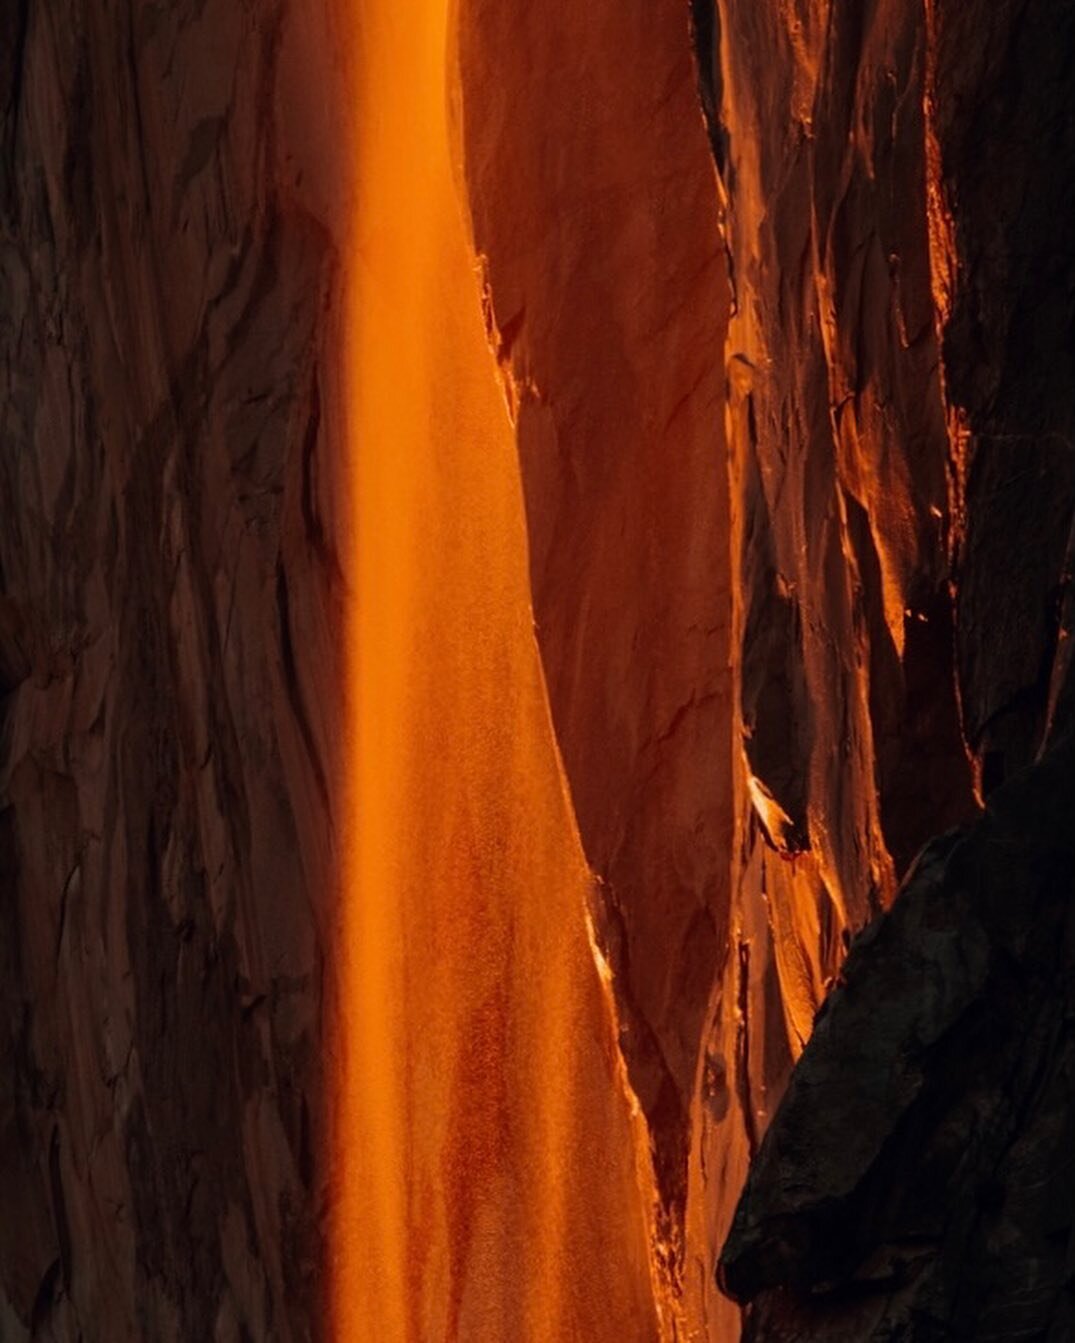 Our planet is such a delight! Each February towards the end of the month, the sun is in the right place to perfectly back light Horsetail Falls during sunset. Even the large crowds gathered at the base of El Capitan couldn&rsquo;t take away from the 